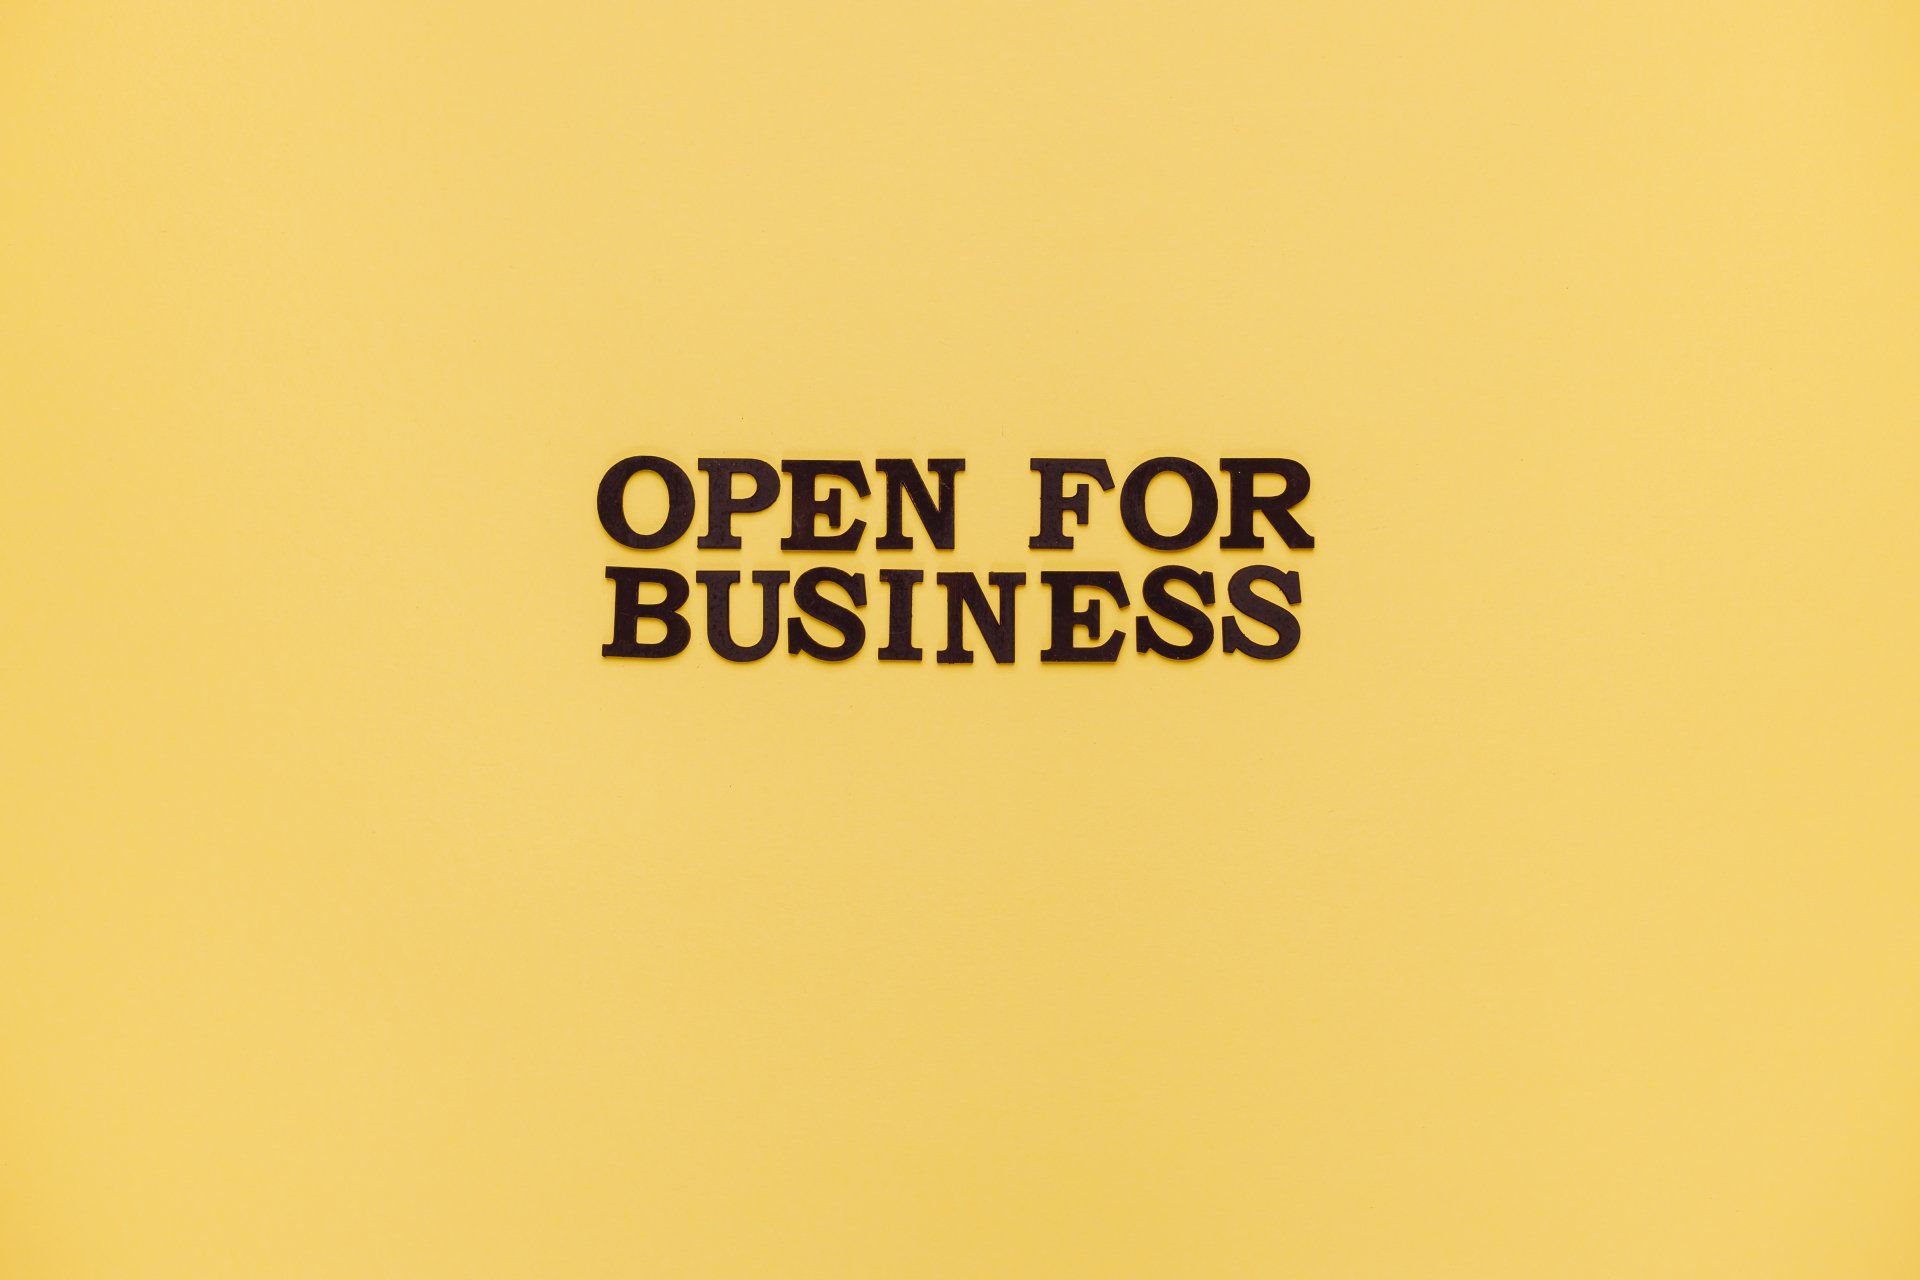 A yellow background with the words `` open for business '' written on it.